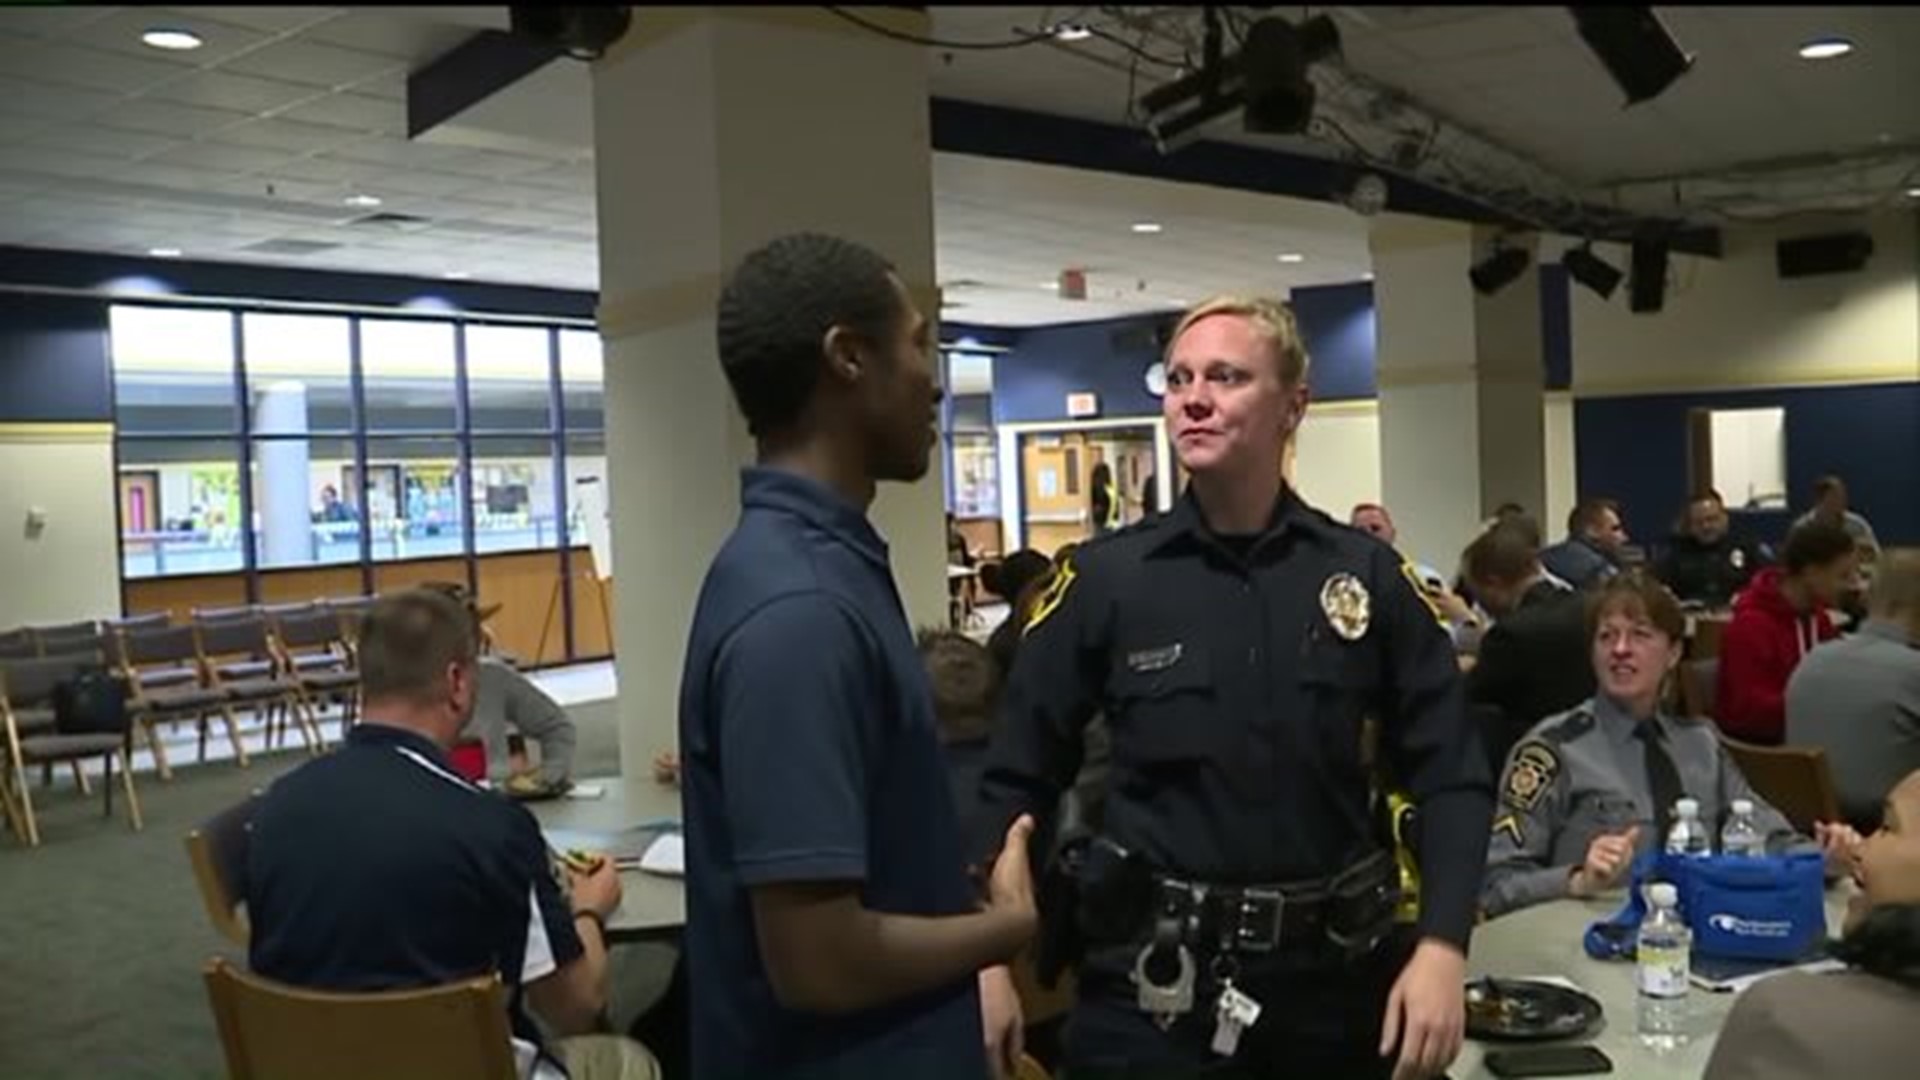 Youth Discuss Police and Race Issues with Authorities